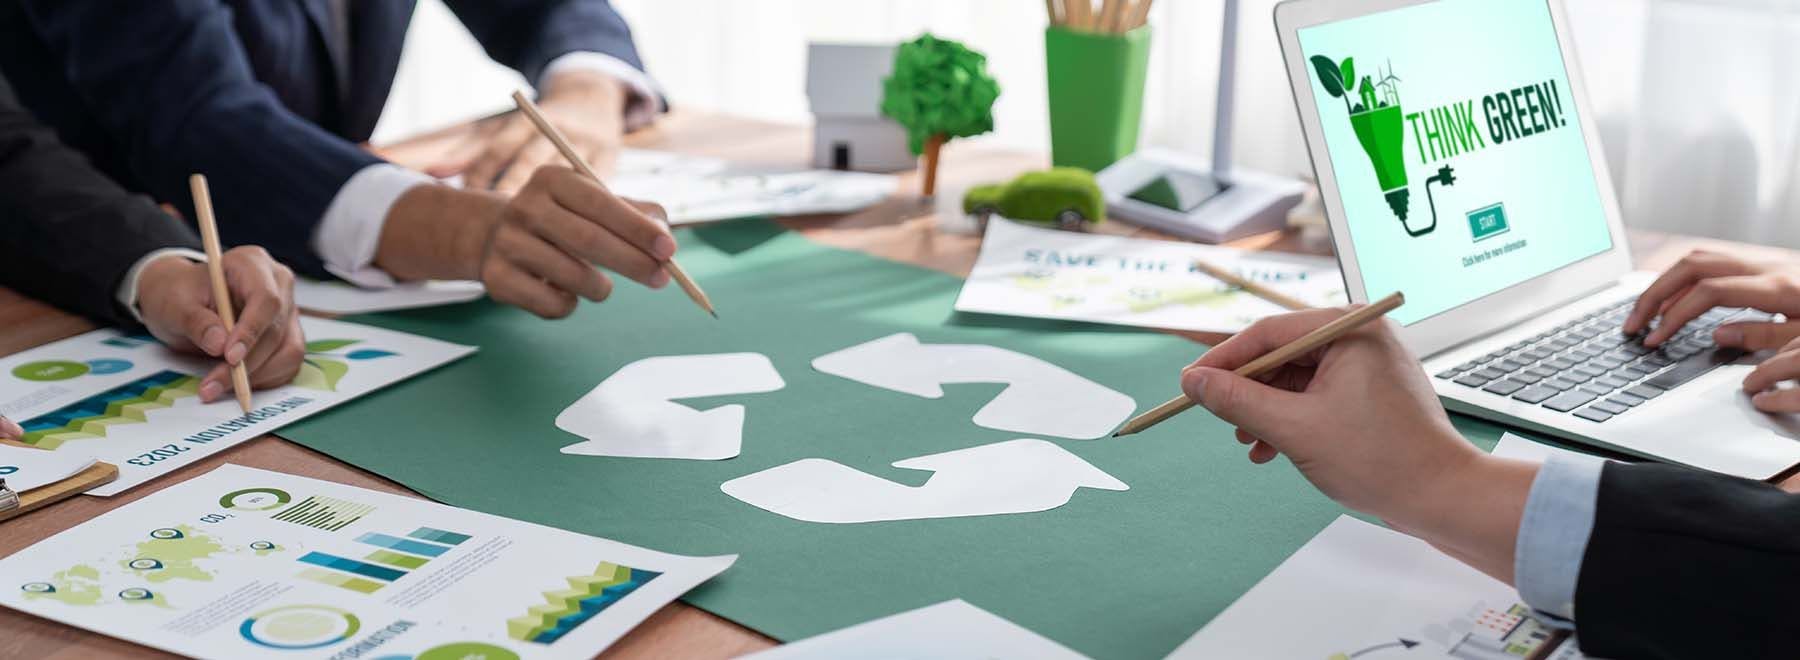 Strategies for Reducing Material Waste | Image Credit: © Summit Art Creations - stock.adobe.com